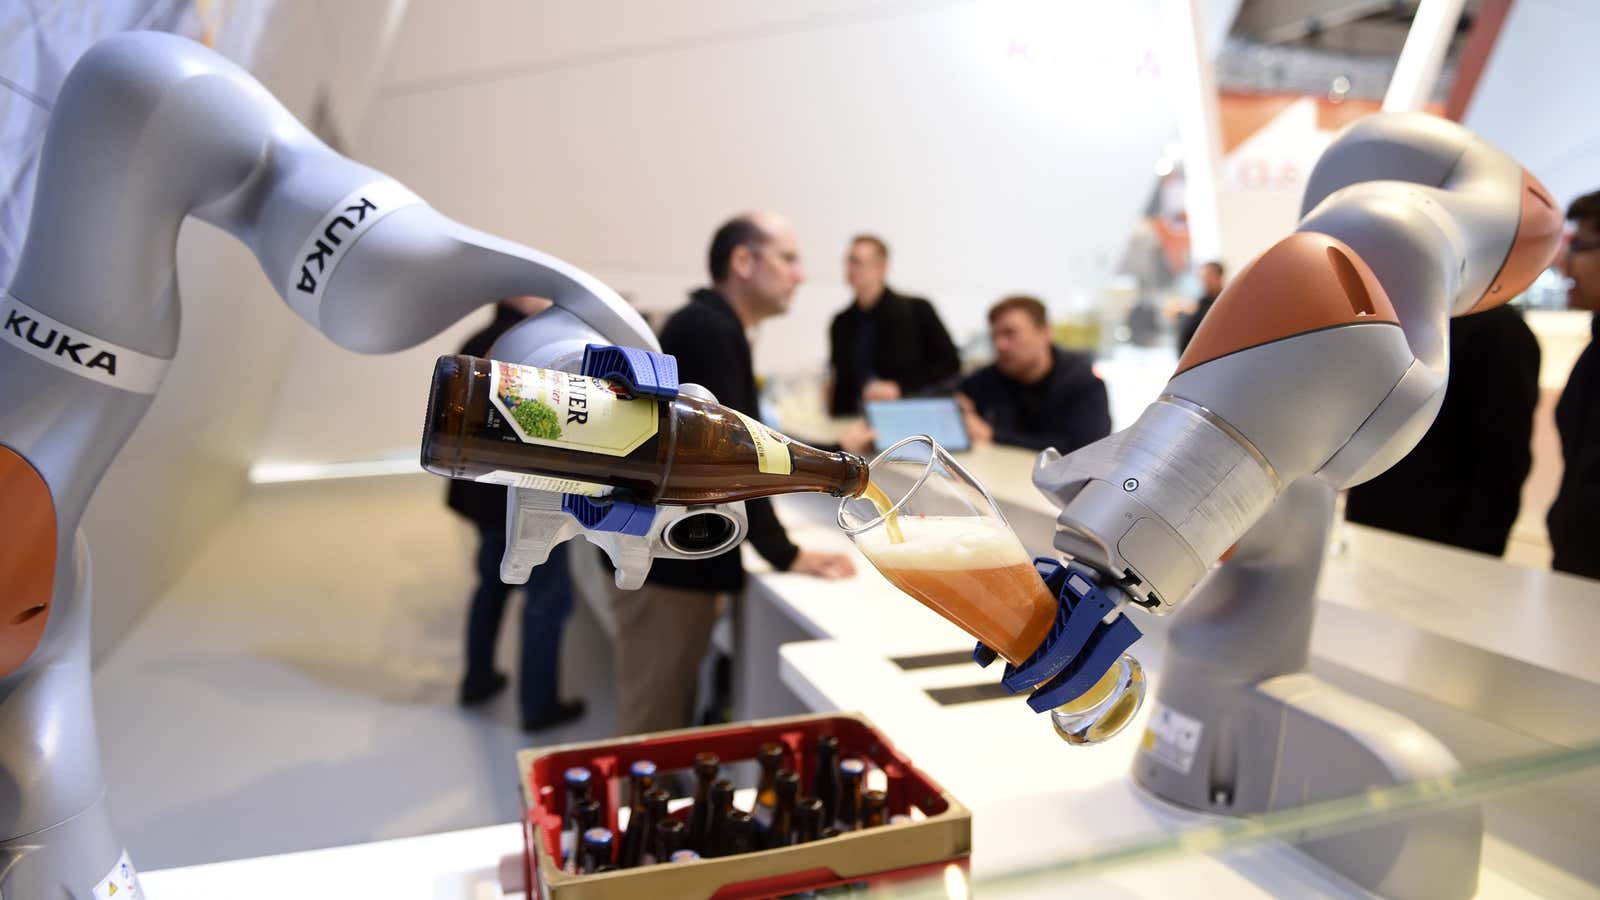 Robots in the Kuka stand pour a beer into a glass at the Hannover Messe industrial trade fair in Hanover, Germany.